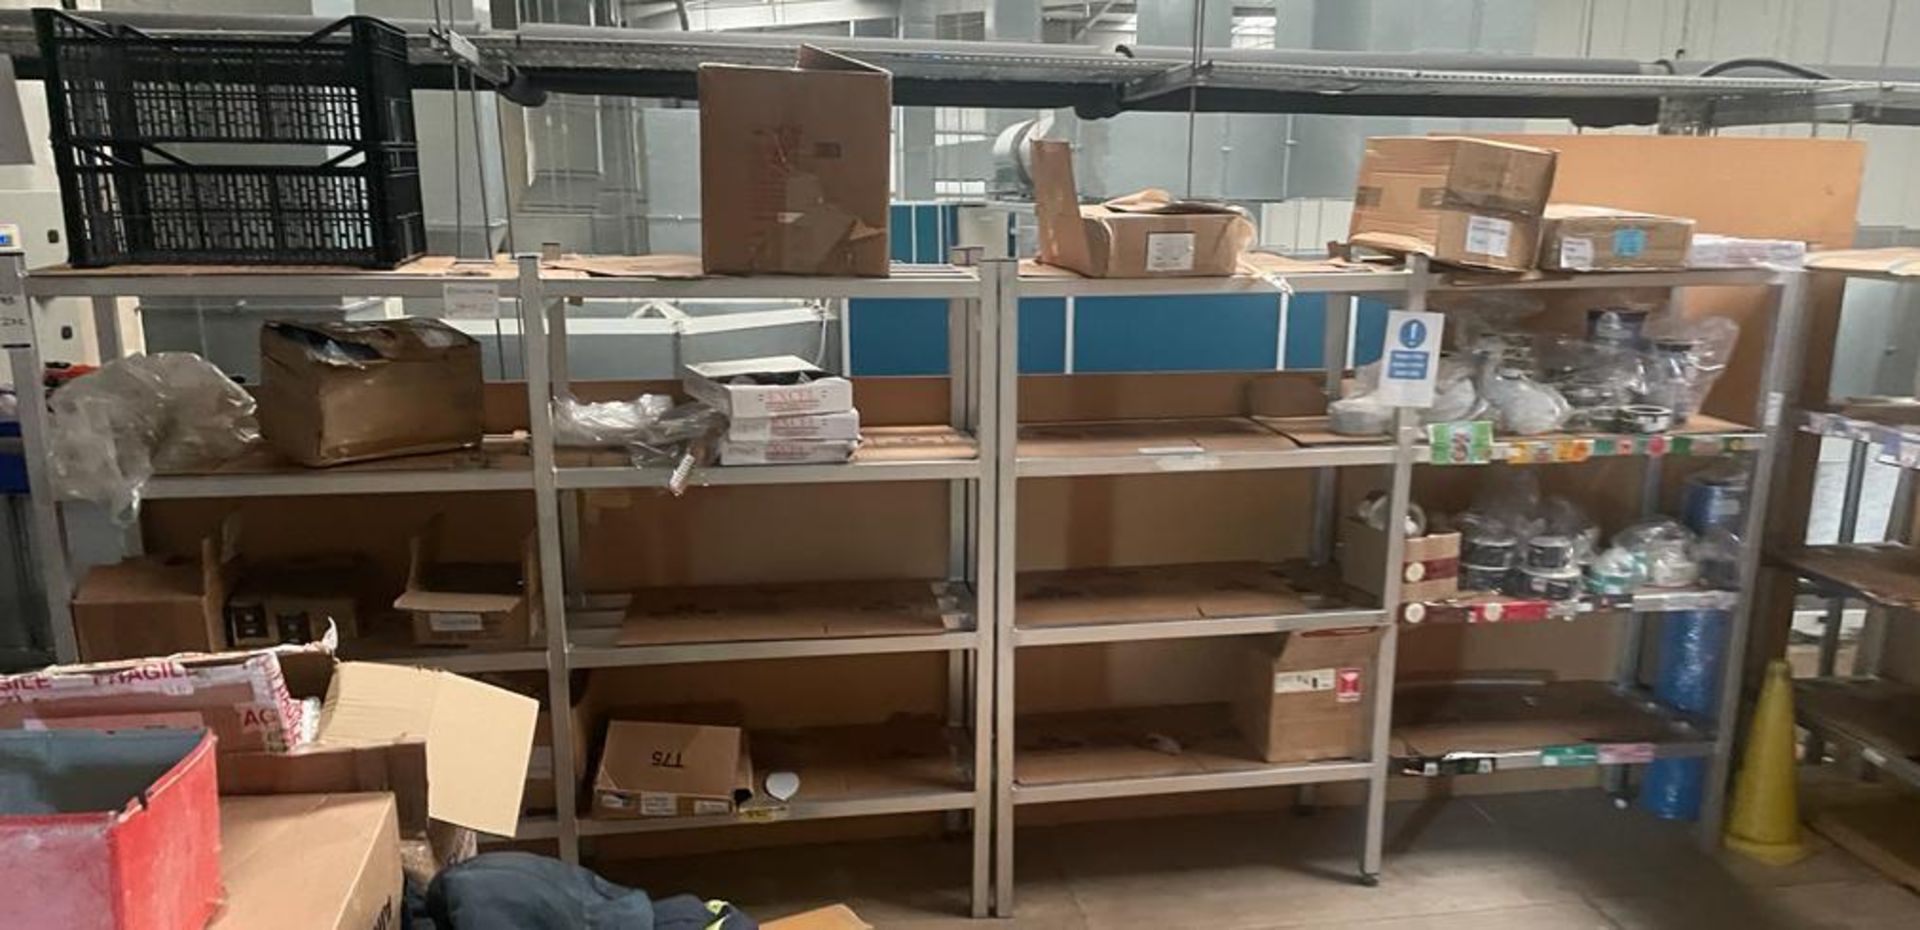 5 Shelving Units, 3 Stainless Steel & 2 Boltless (Contents Not Included) (Location: Park Royal.